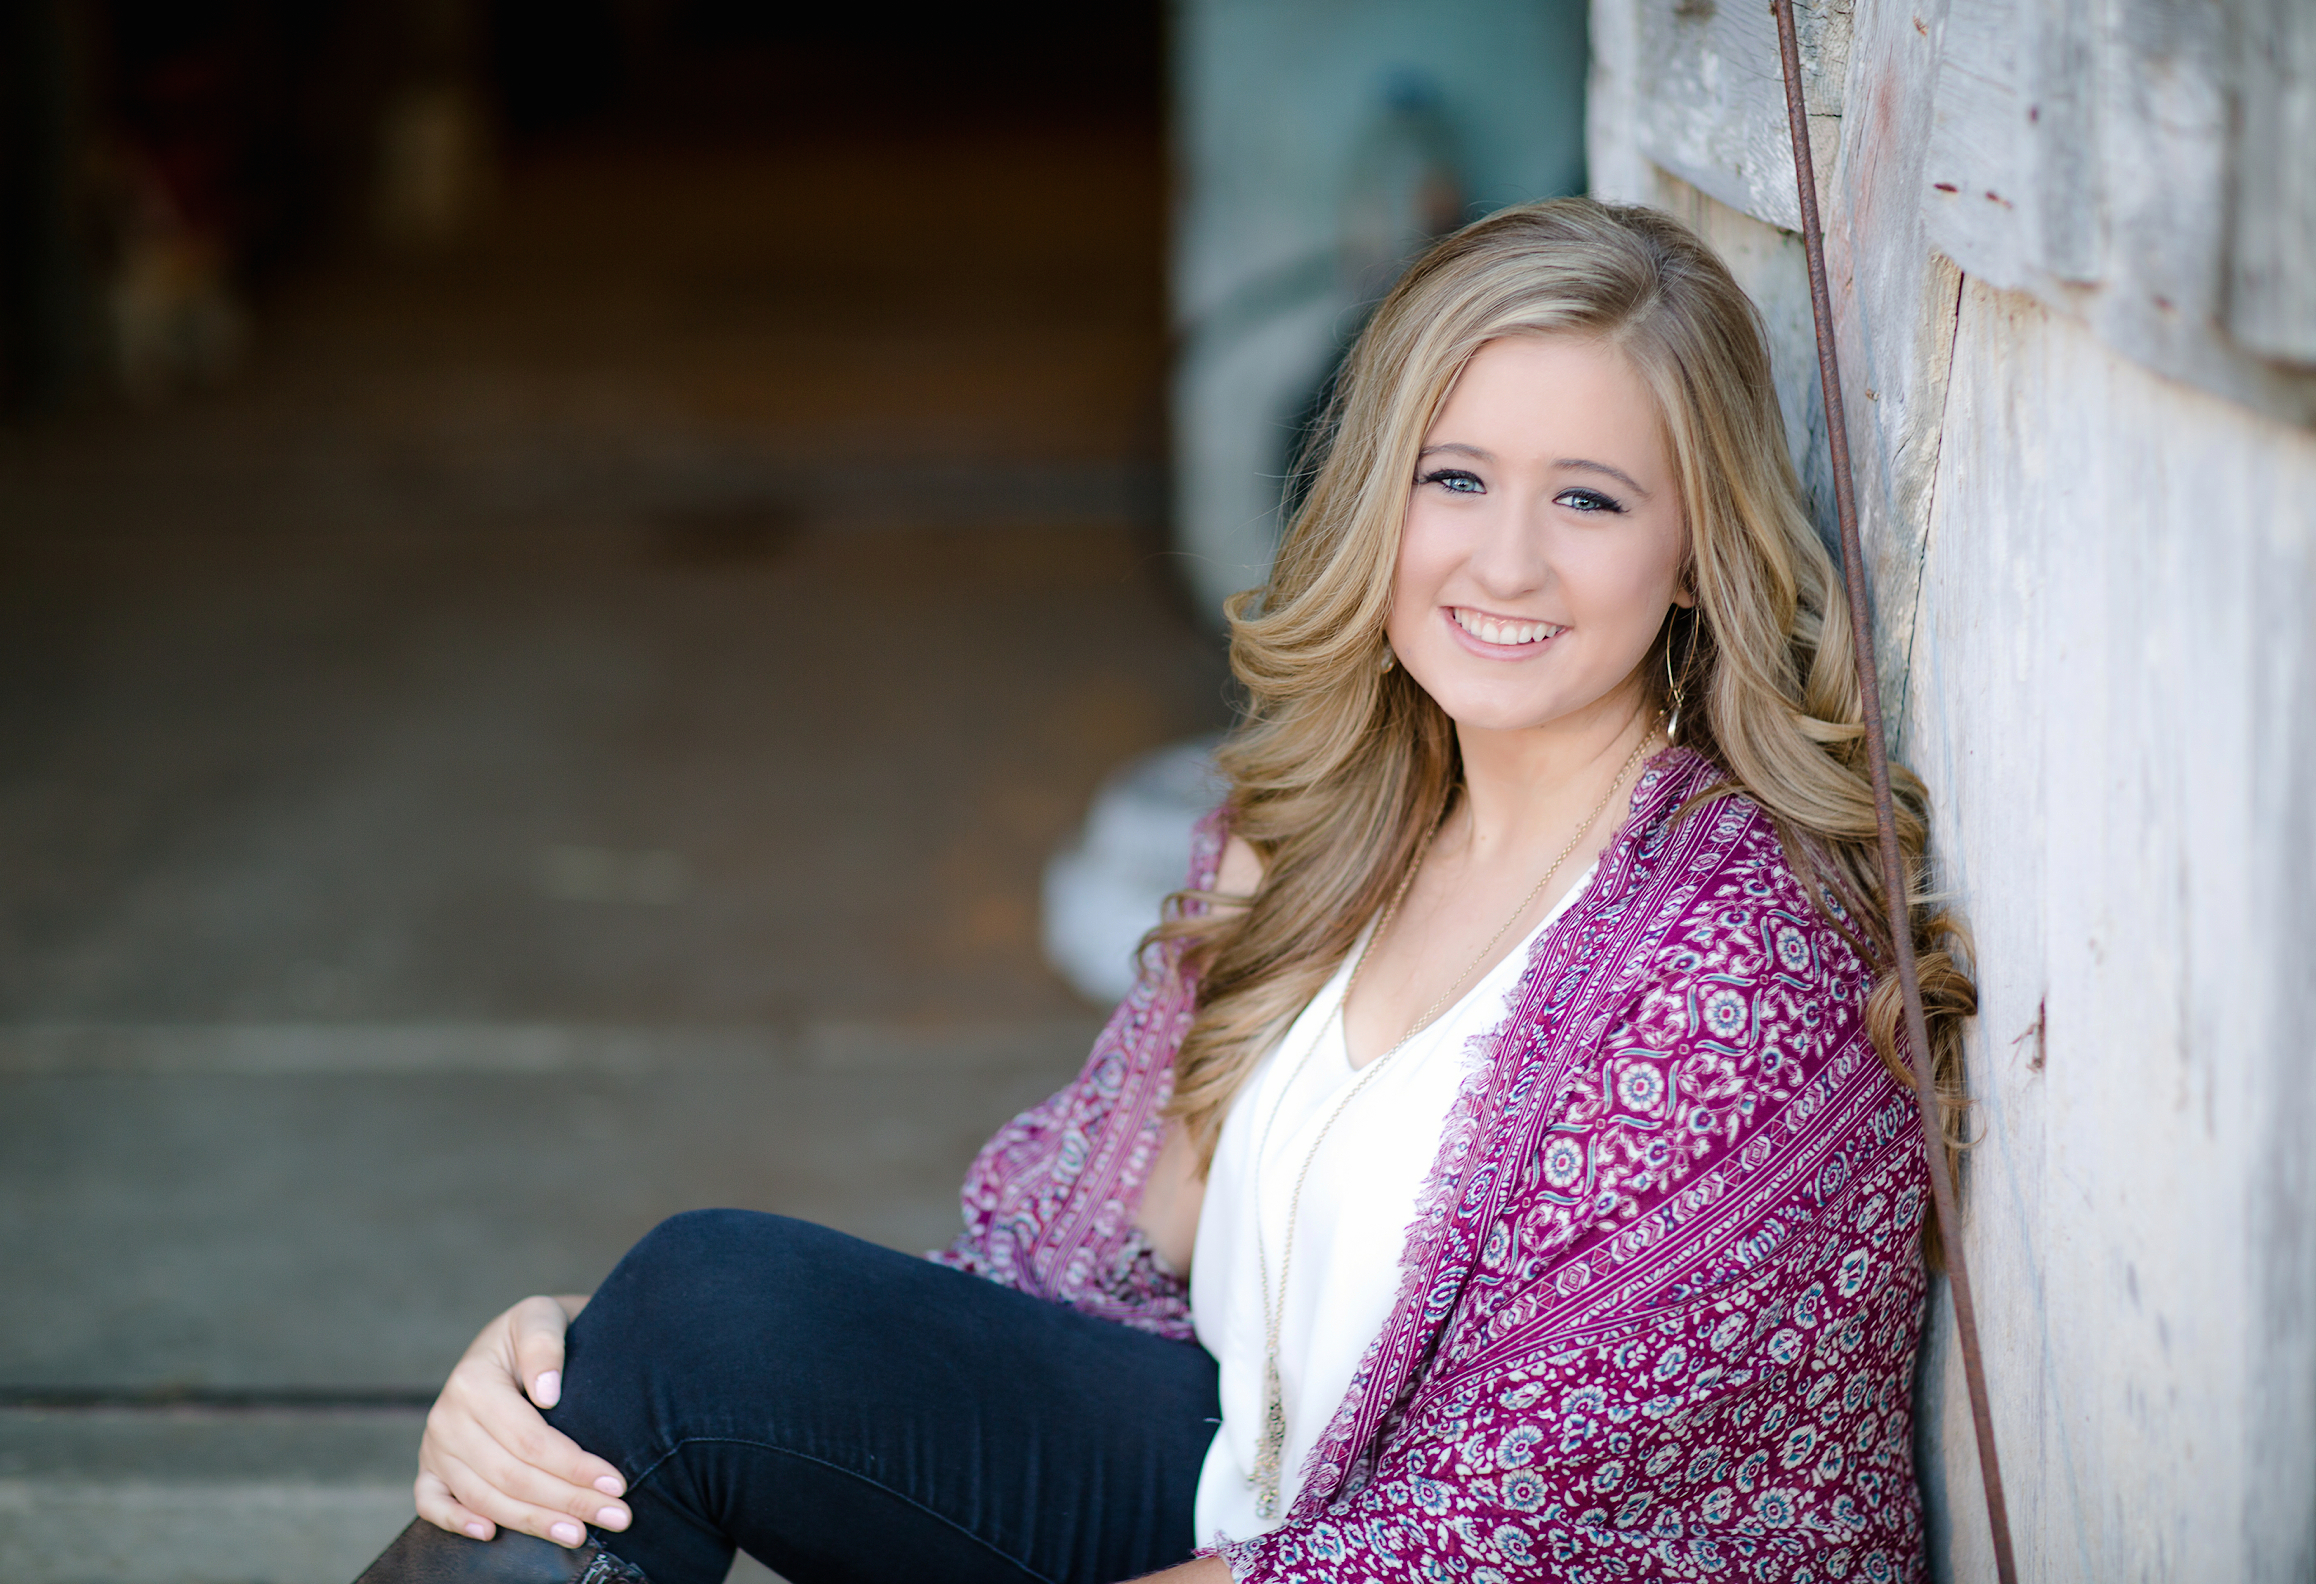 Senior Sessions – The what to wear, when to schedule and why ...